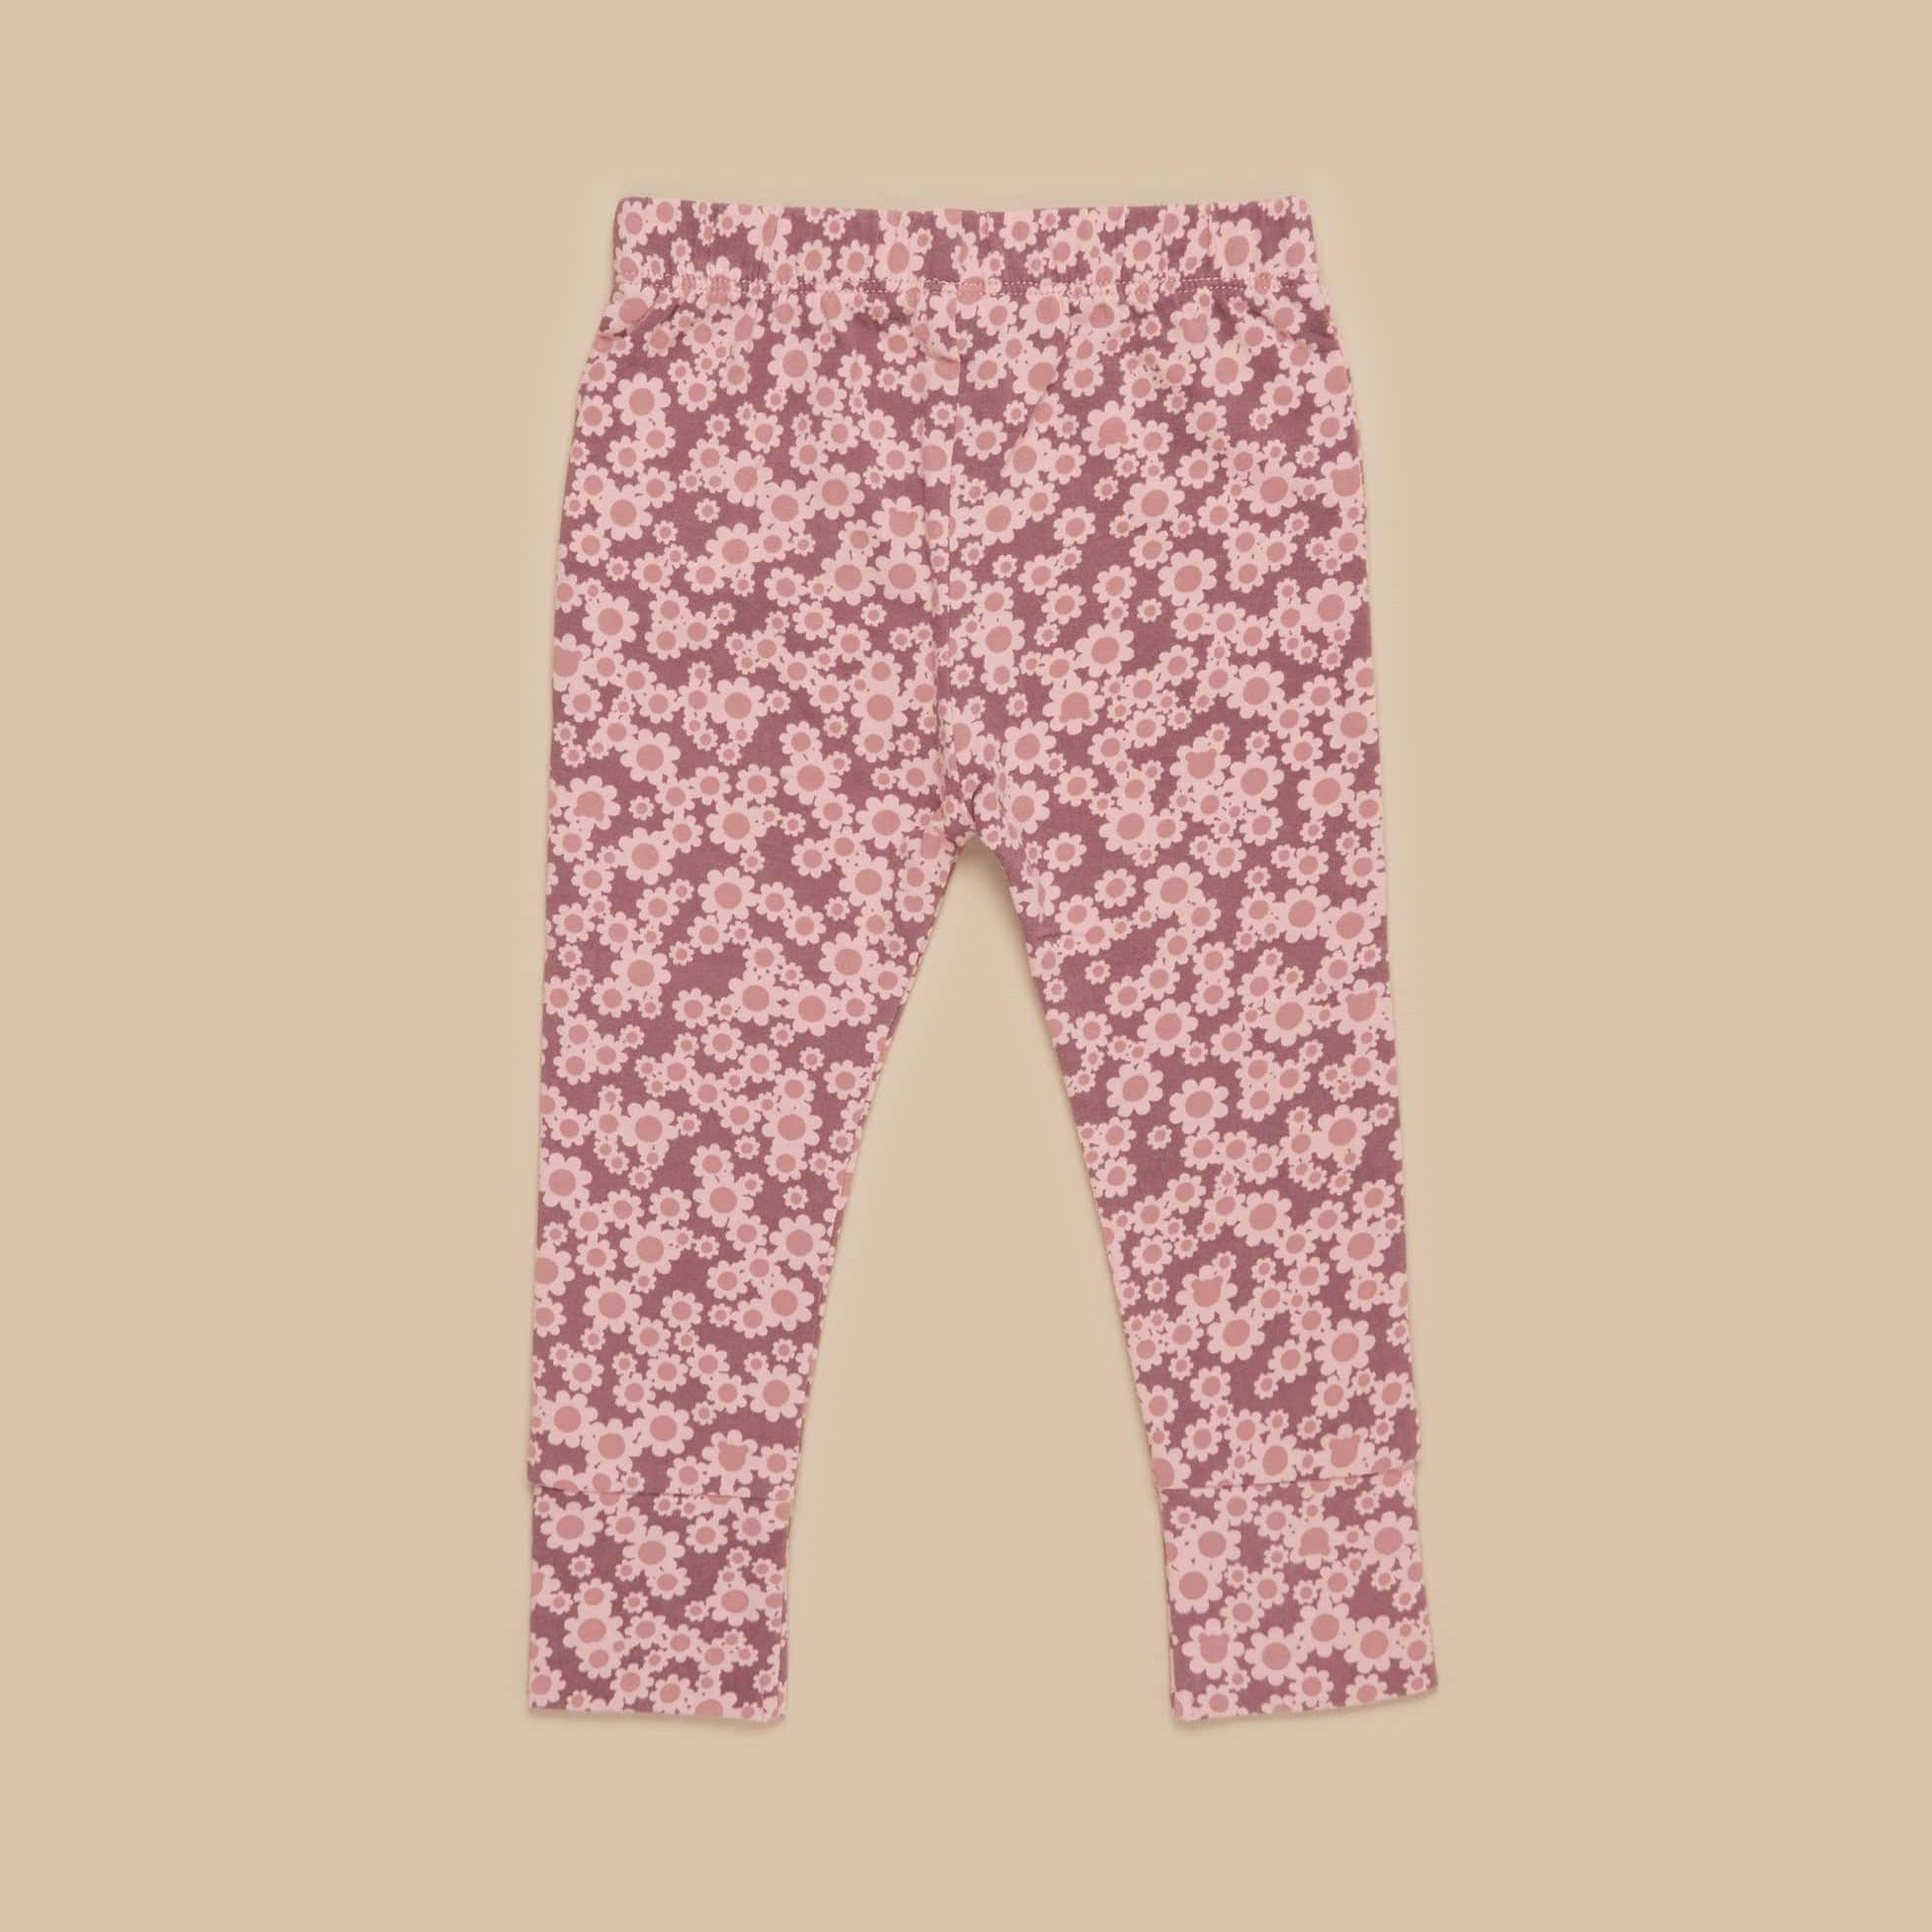 Huxbaby flower leggings - angus and dudley